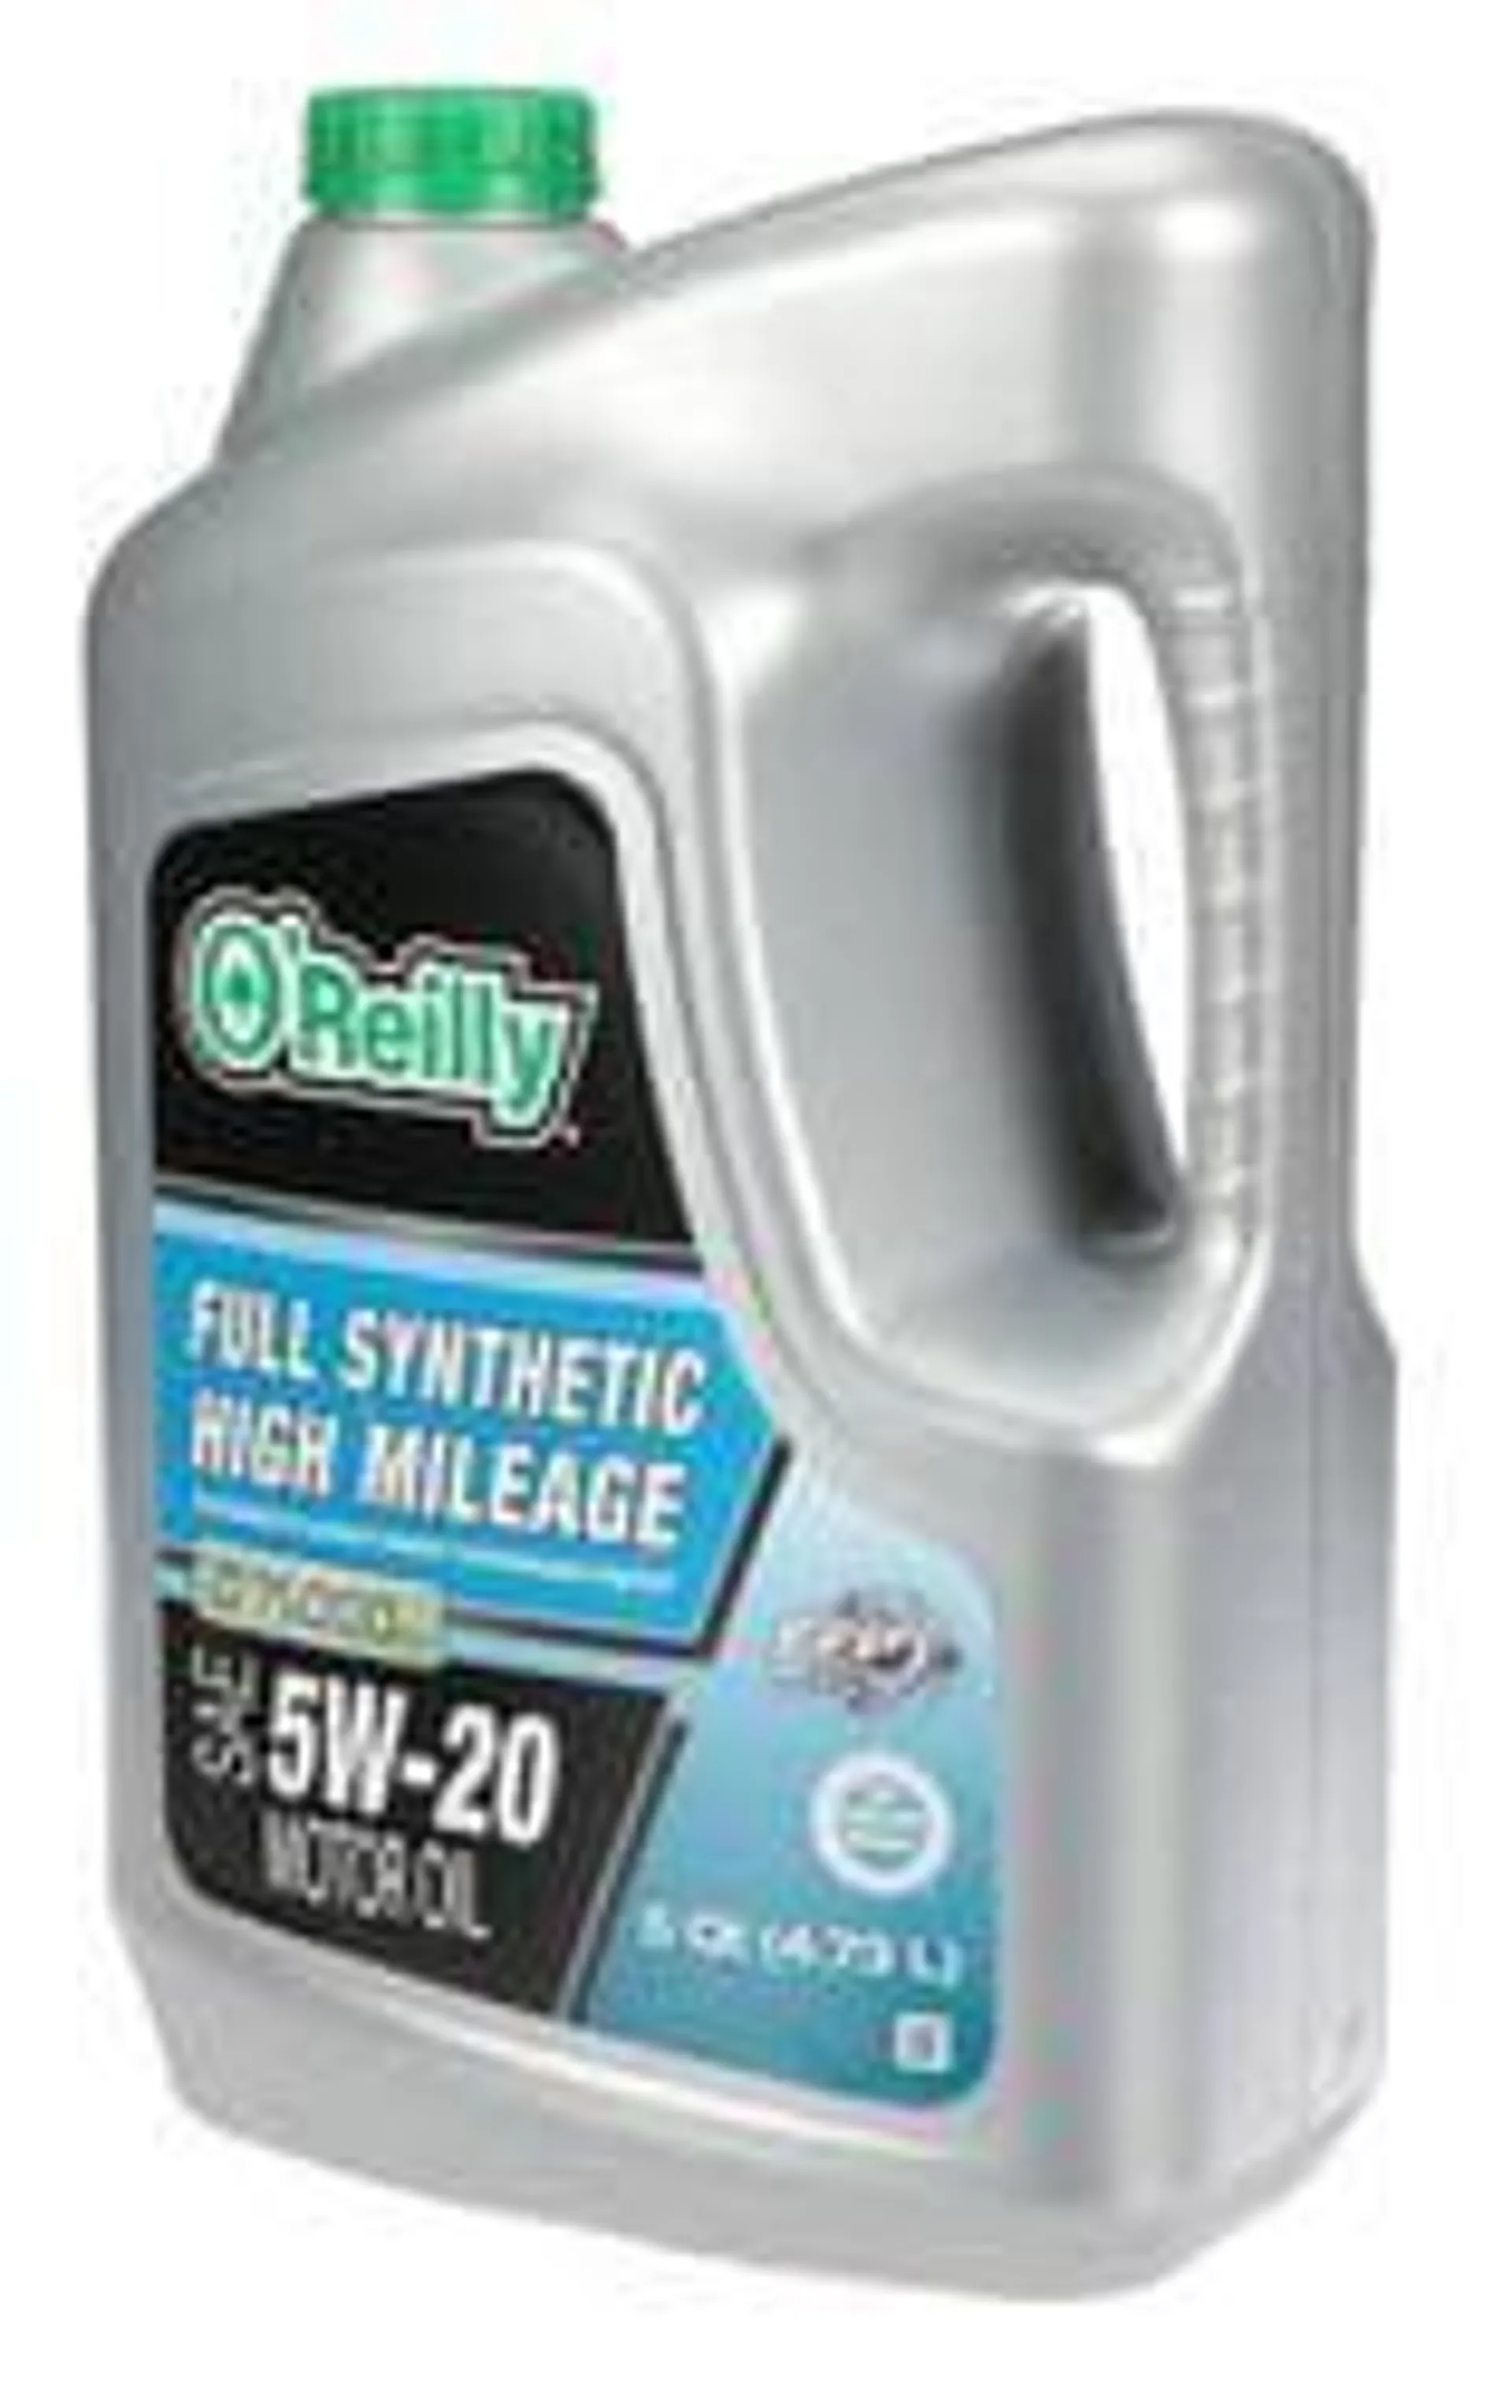 O'Reilly Full Synthetic Full Synthetic High Mileage Motor Oil 5W-20 5 Quart - HISYN5-20-5QT